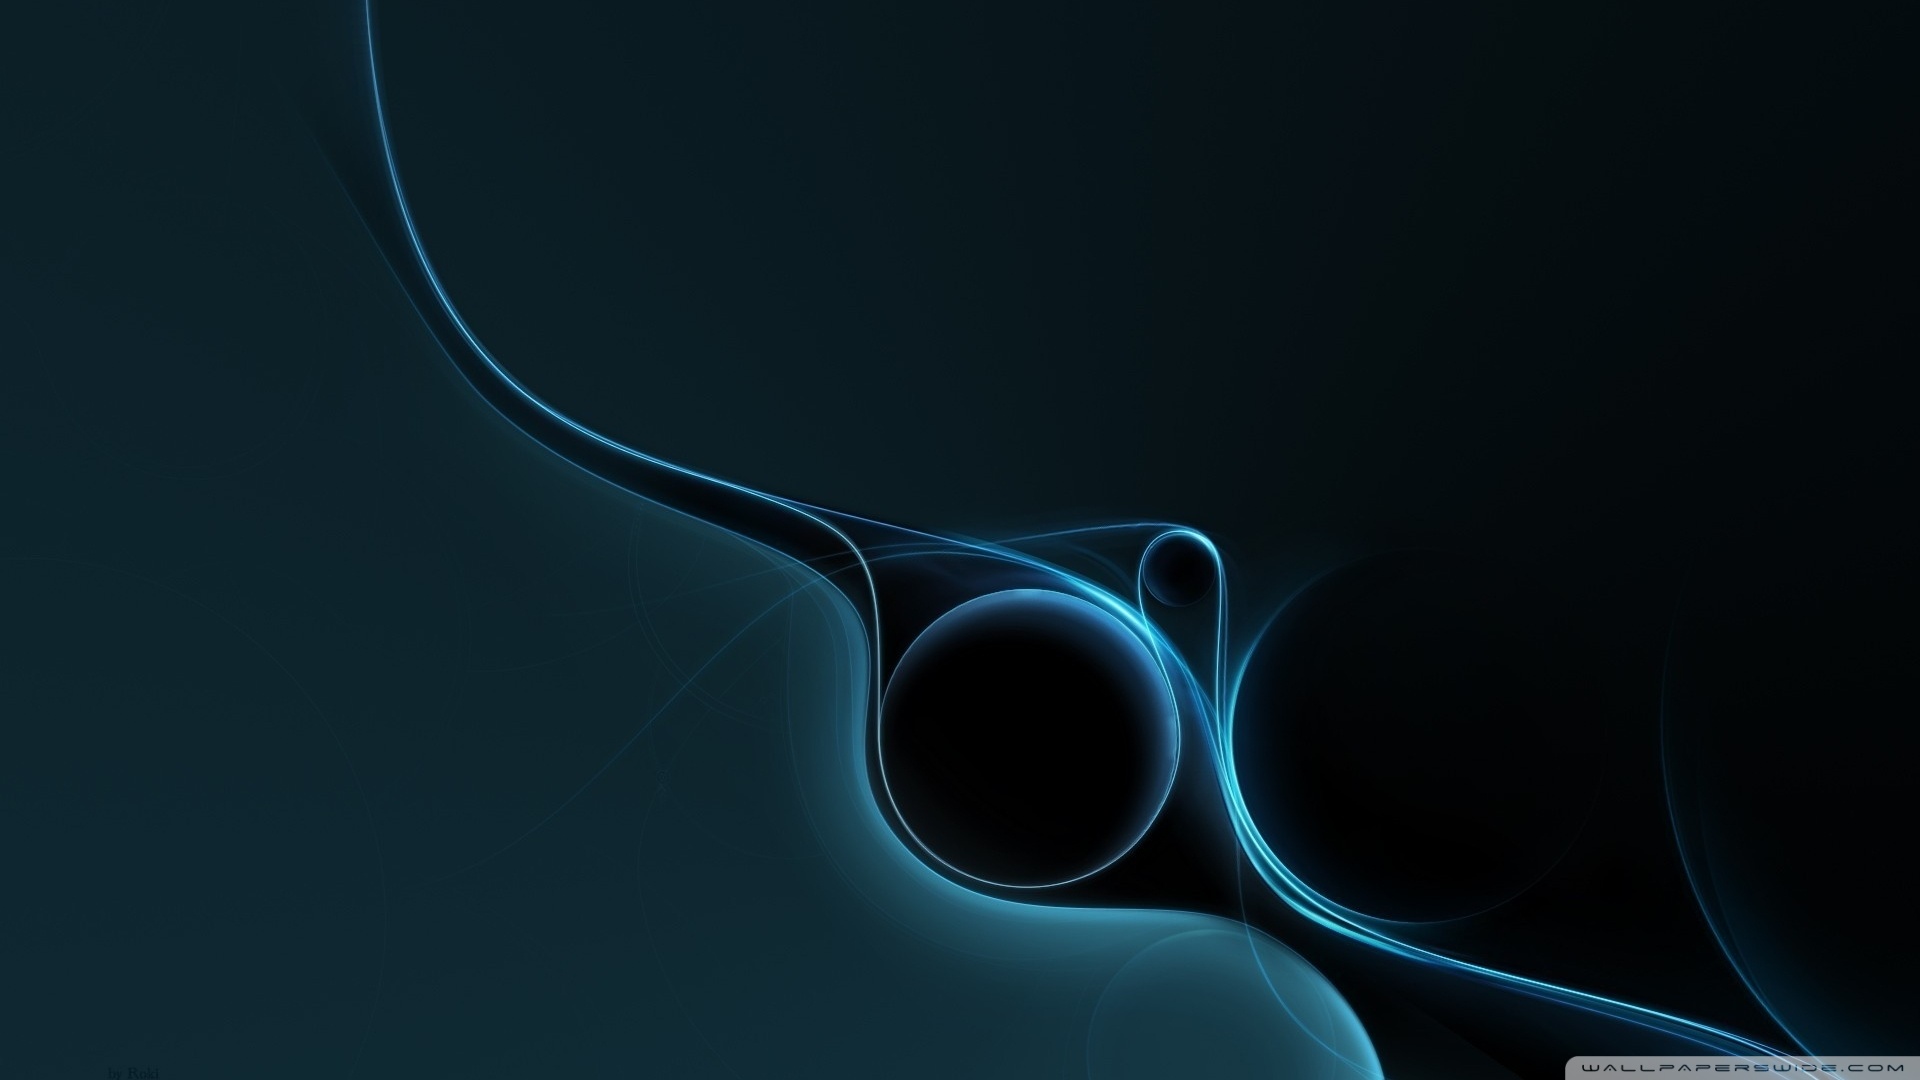 Awesome Black themed abstract wallpapers in HD 1 Design Utopia